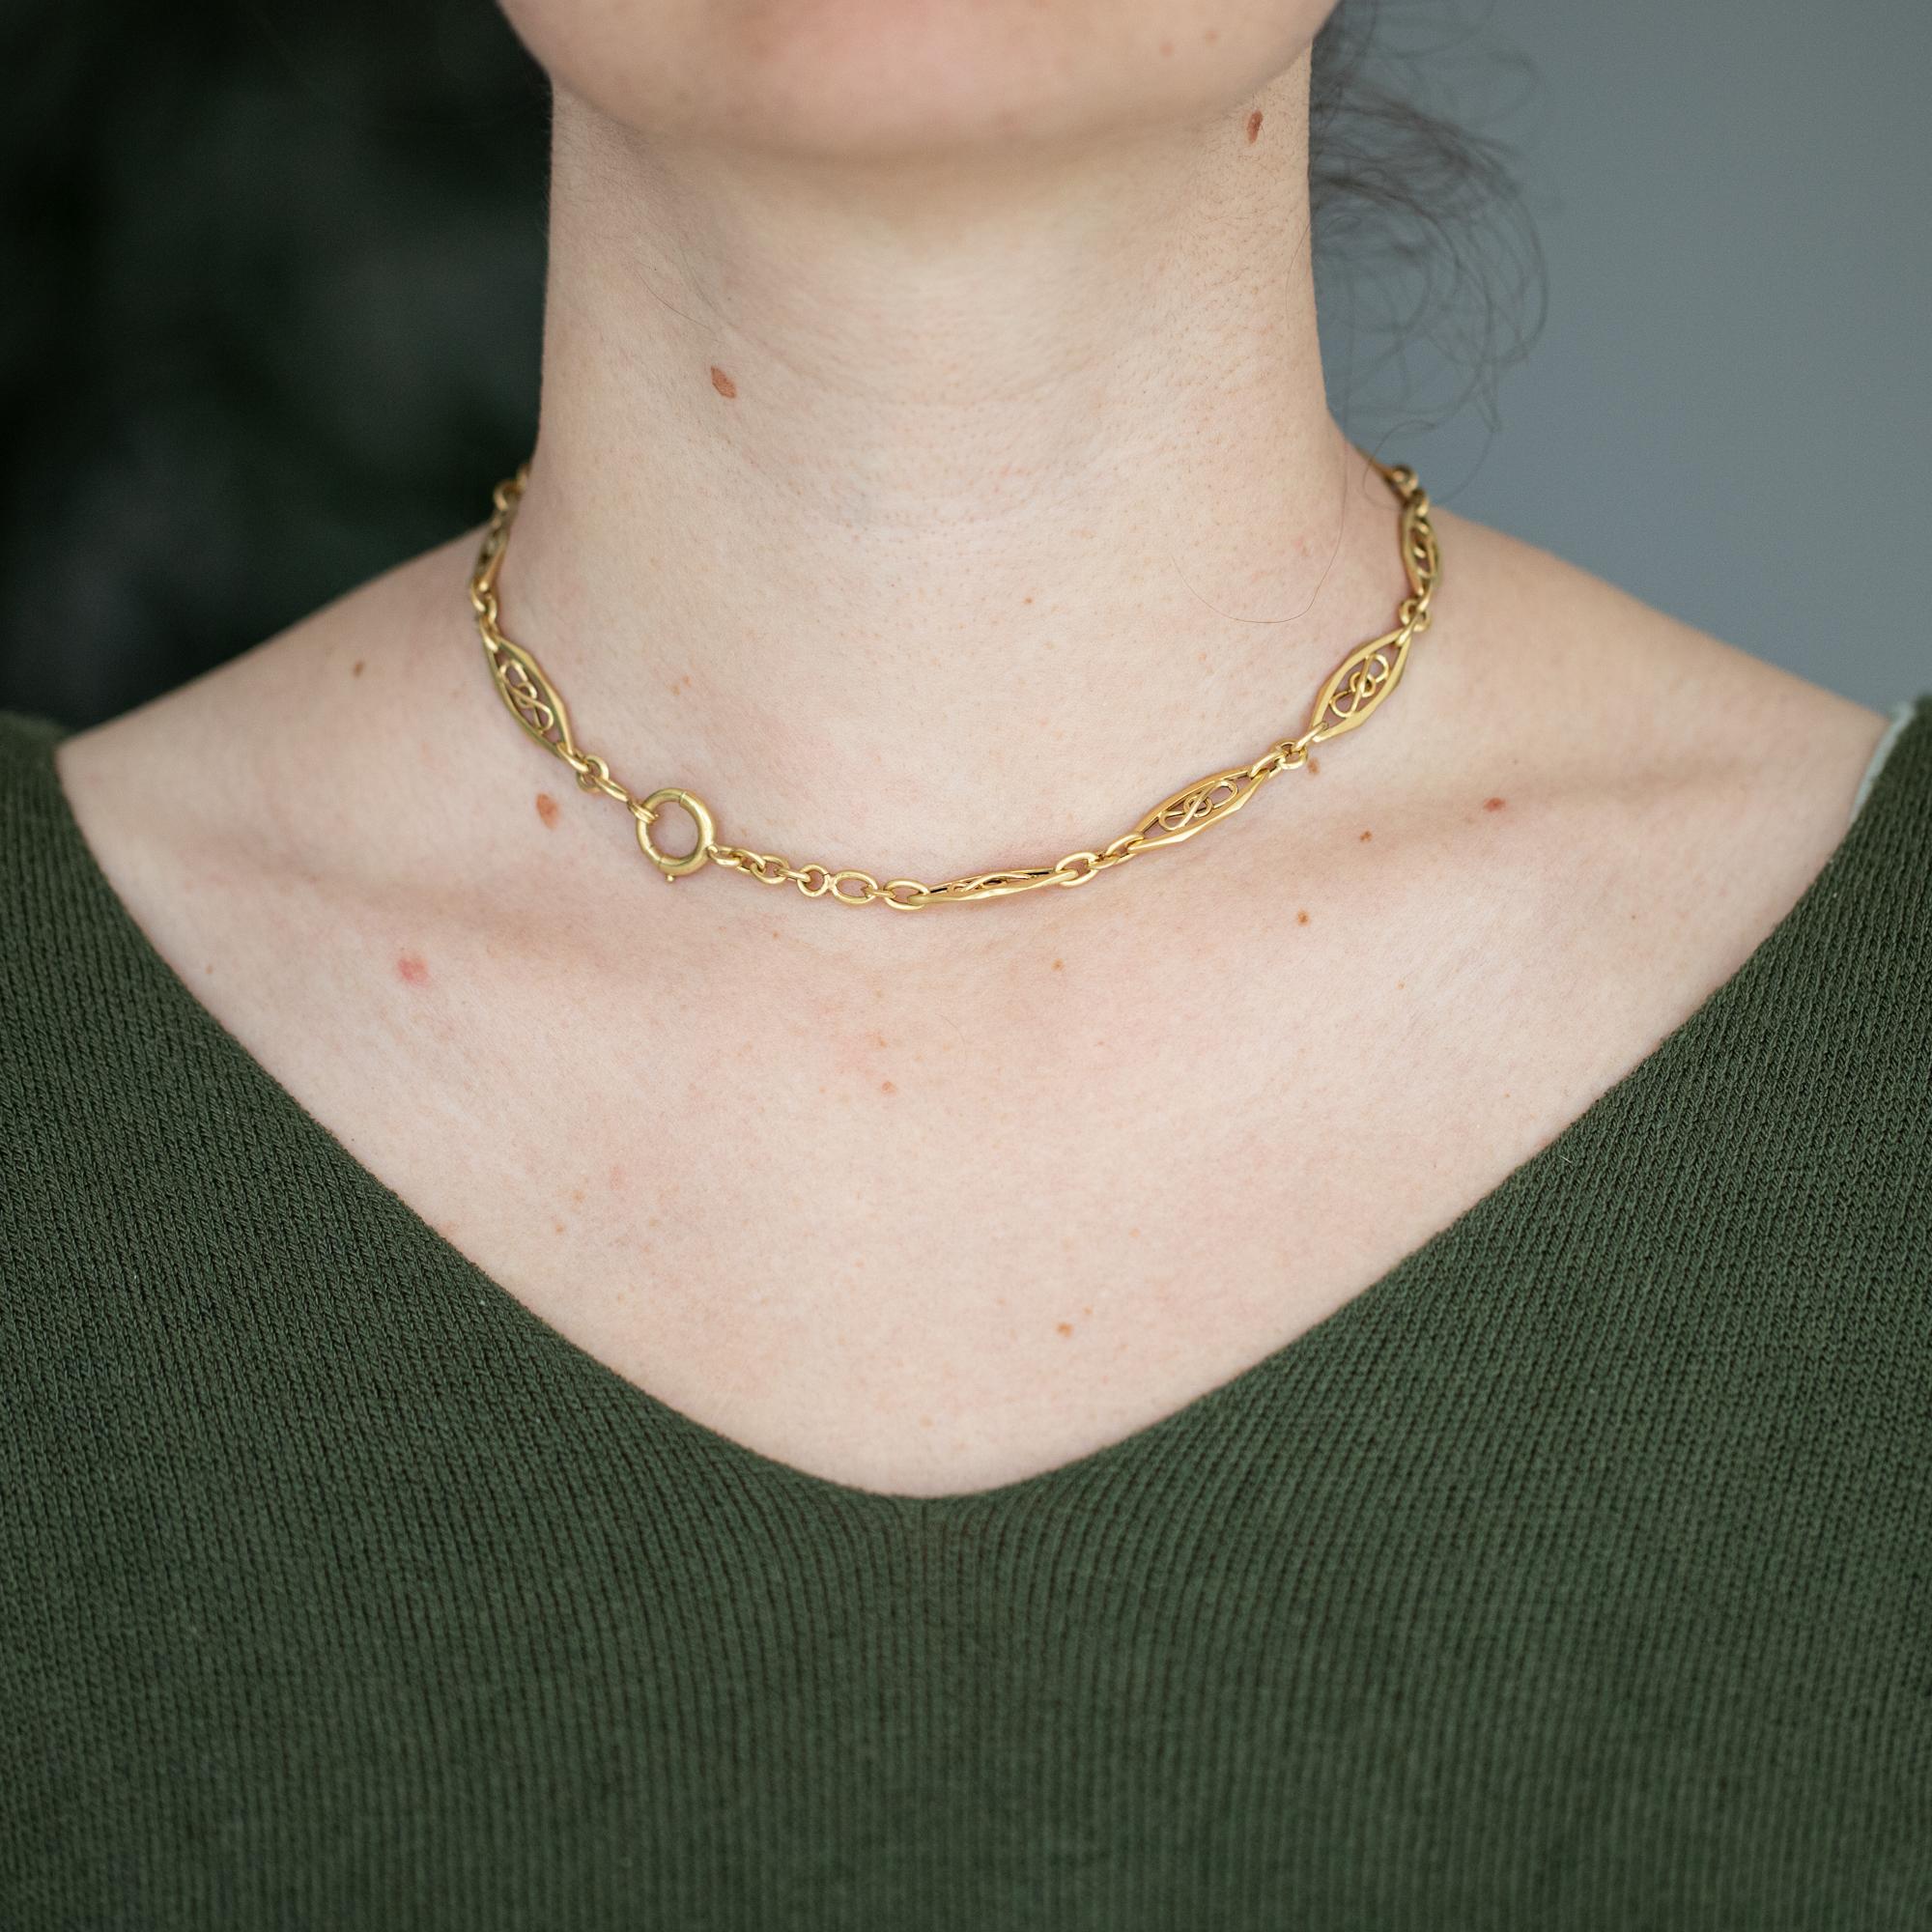 For sale is this wonderful 18 K yellow gold Albert necklace. It consists of spacial, fancy looking Lozenge links an antique bolt ring. The necklace is hallmarked with French weevils, which were struck on jewels imported into France since 1864. 

An